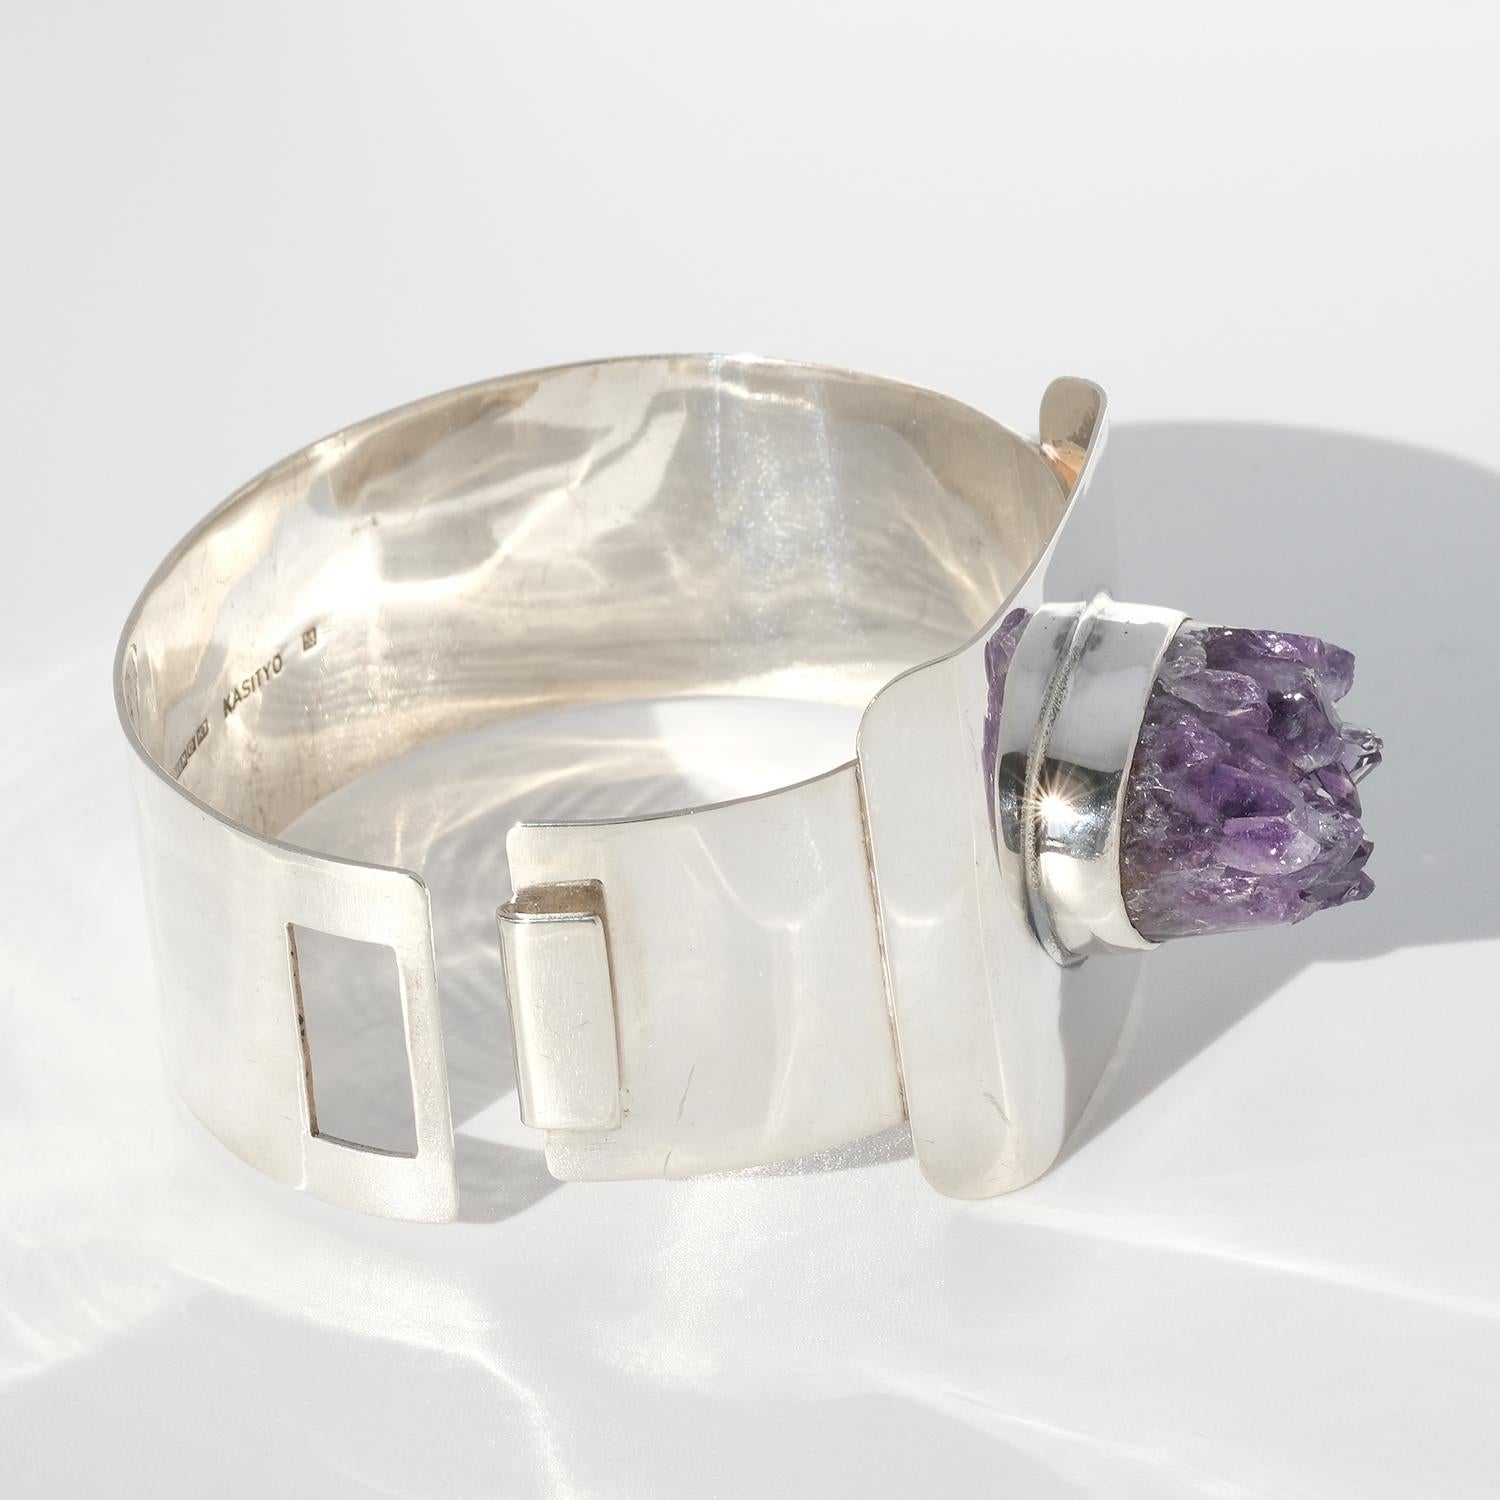 This handmade cuff silver bracelet looks, from above, like a belt buckle. It is adorned with an uniquely shaped amethyst, with pointing ends resembeling an active vulcano. It opens and closes with a practical hook-device.

This cuff bracelet is